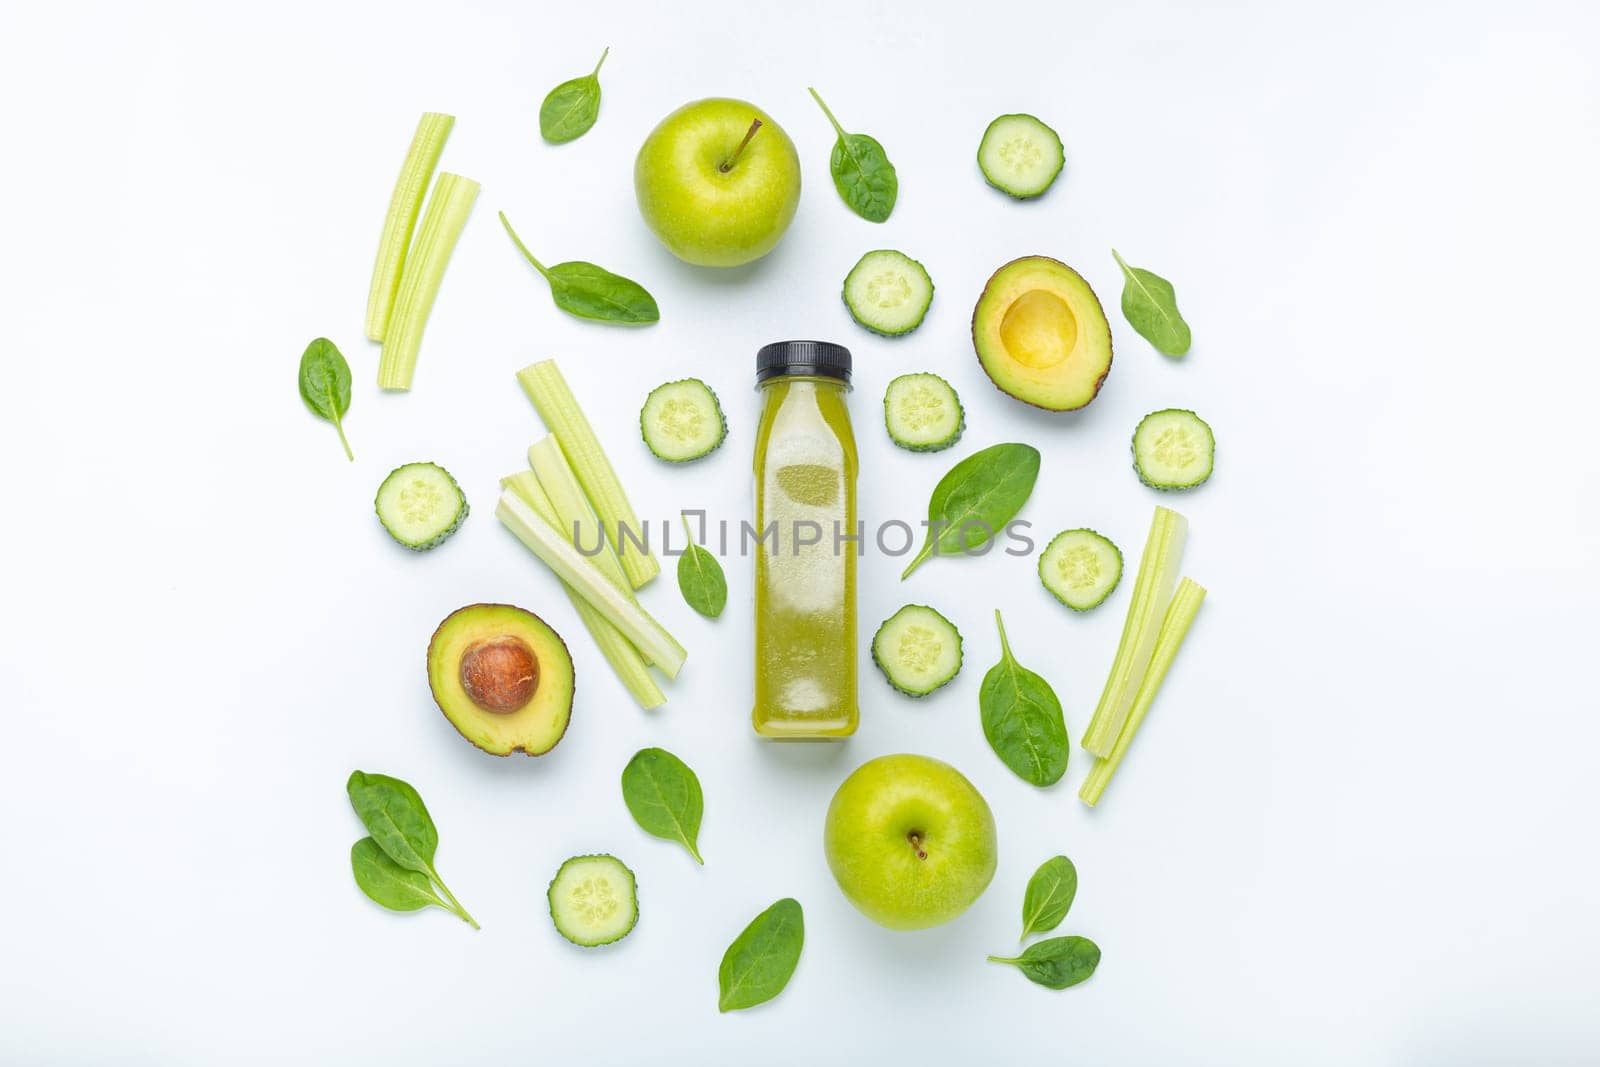 Bottle of green smoothie surrounded by green fruit and vegetables: apples, avocado, spinach, celery sticks, cucumber on white simple background top view. Diet, healthy nutrition, detox by its_al_dente